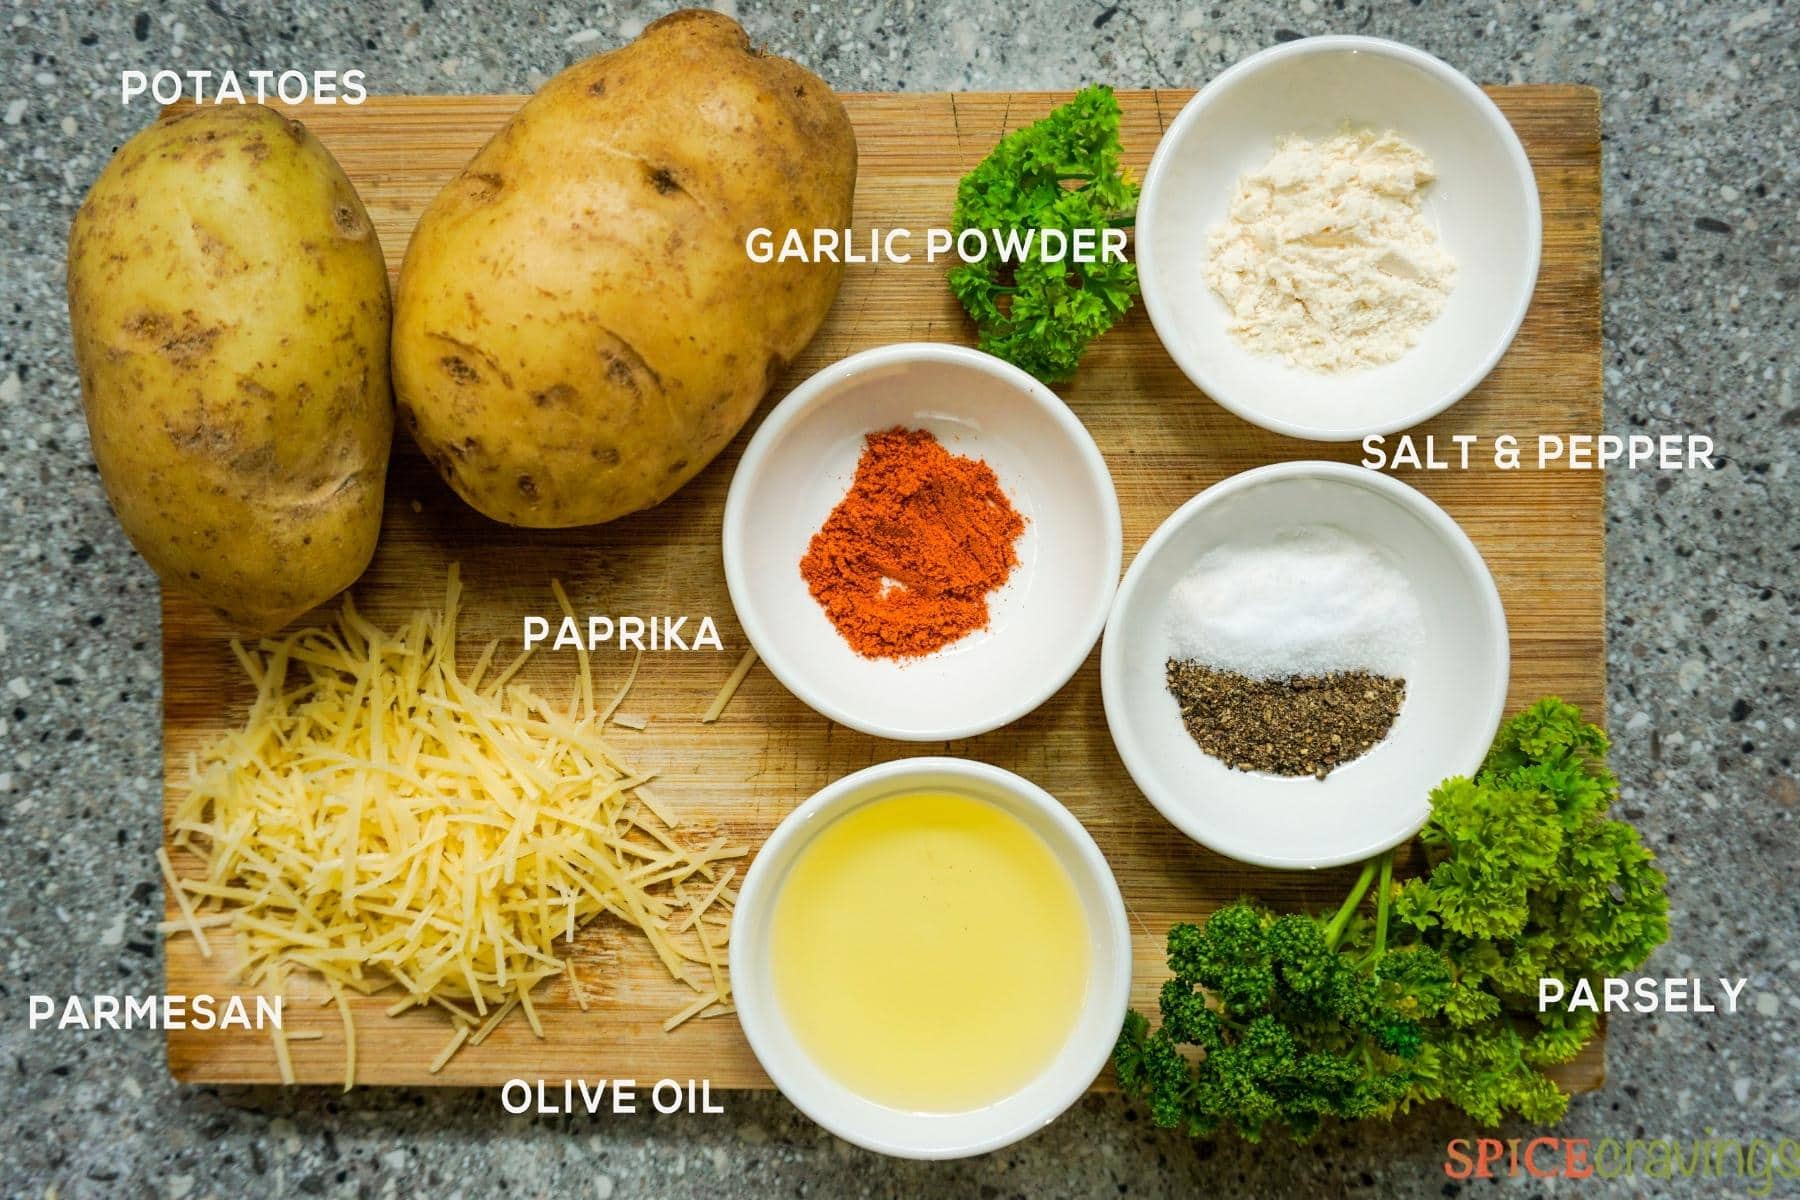 Potatoes, spices, cheese and parsley on cutting board